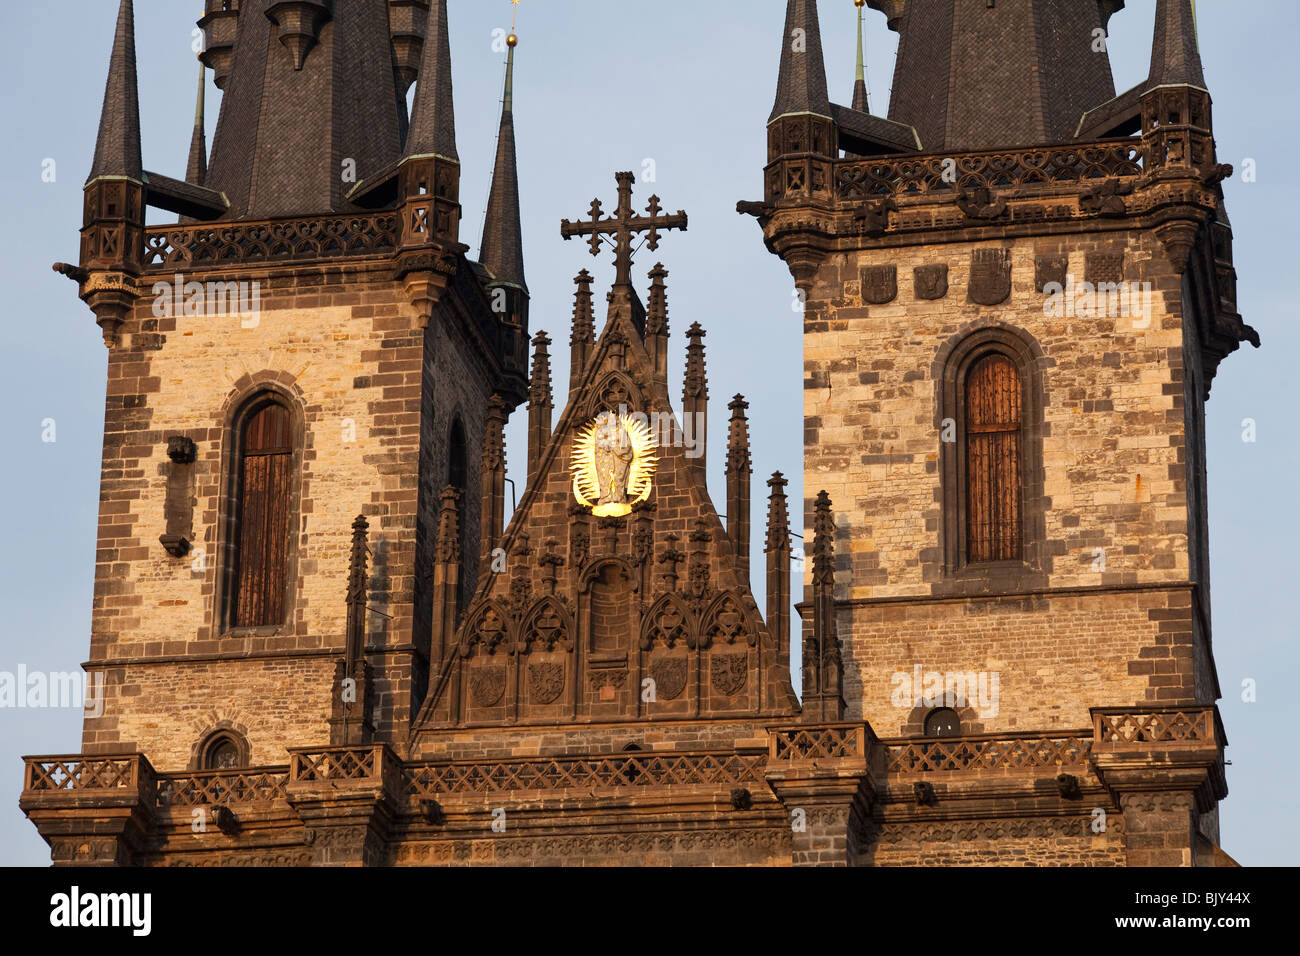 Church of Our Lady before Týn, Old Town Hall Square, Prague, Czech Republic Stock Photo